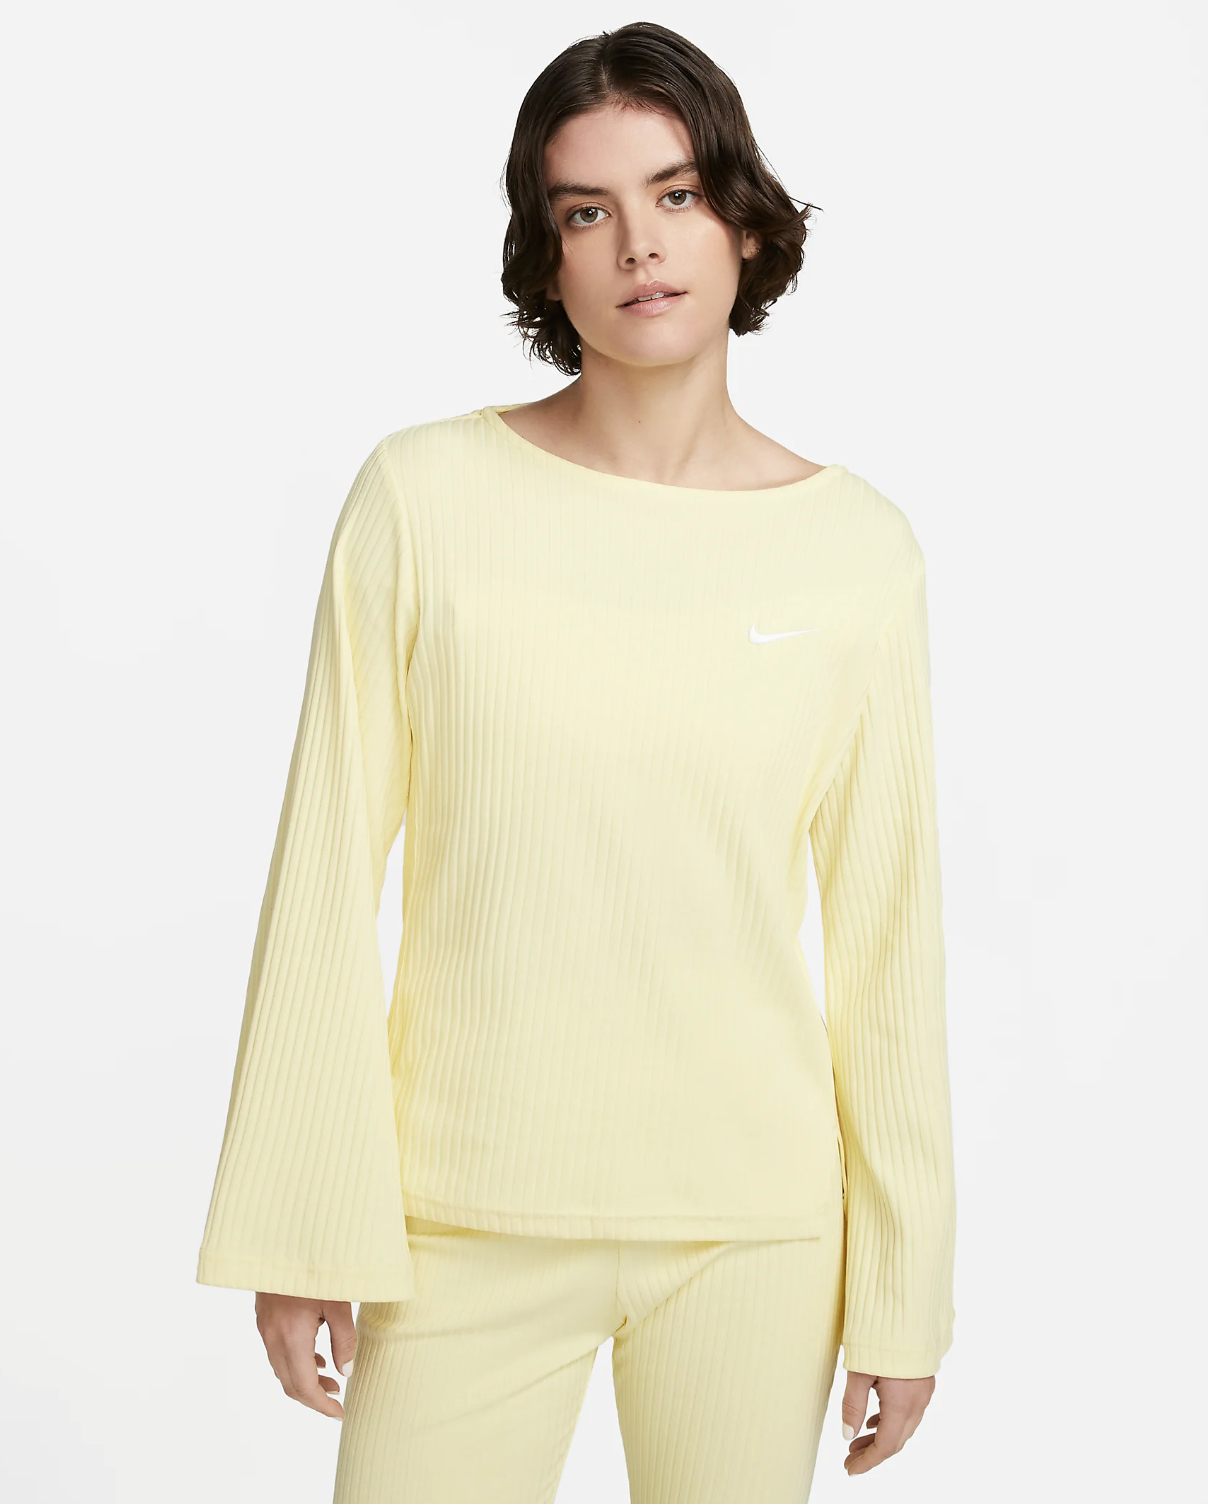 The top in light yellow